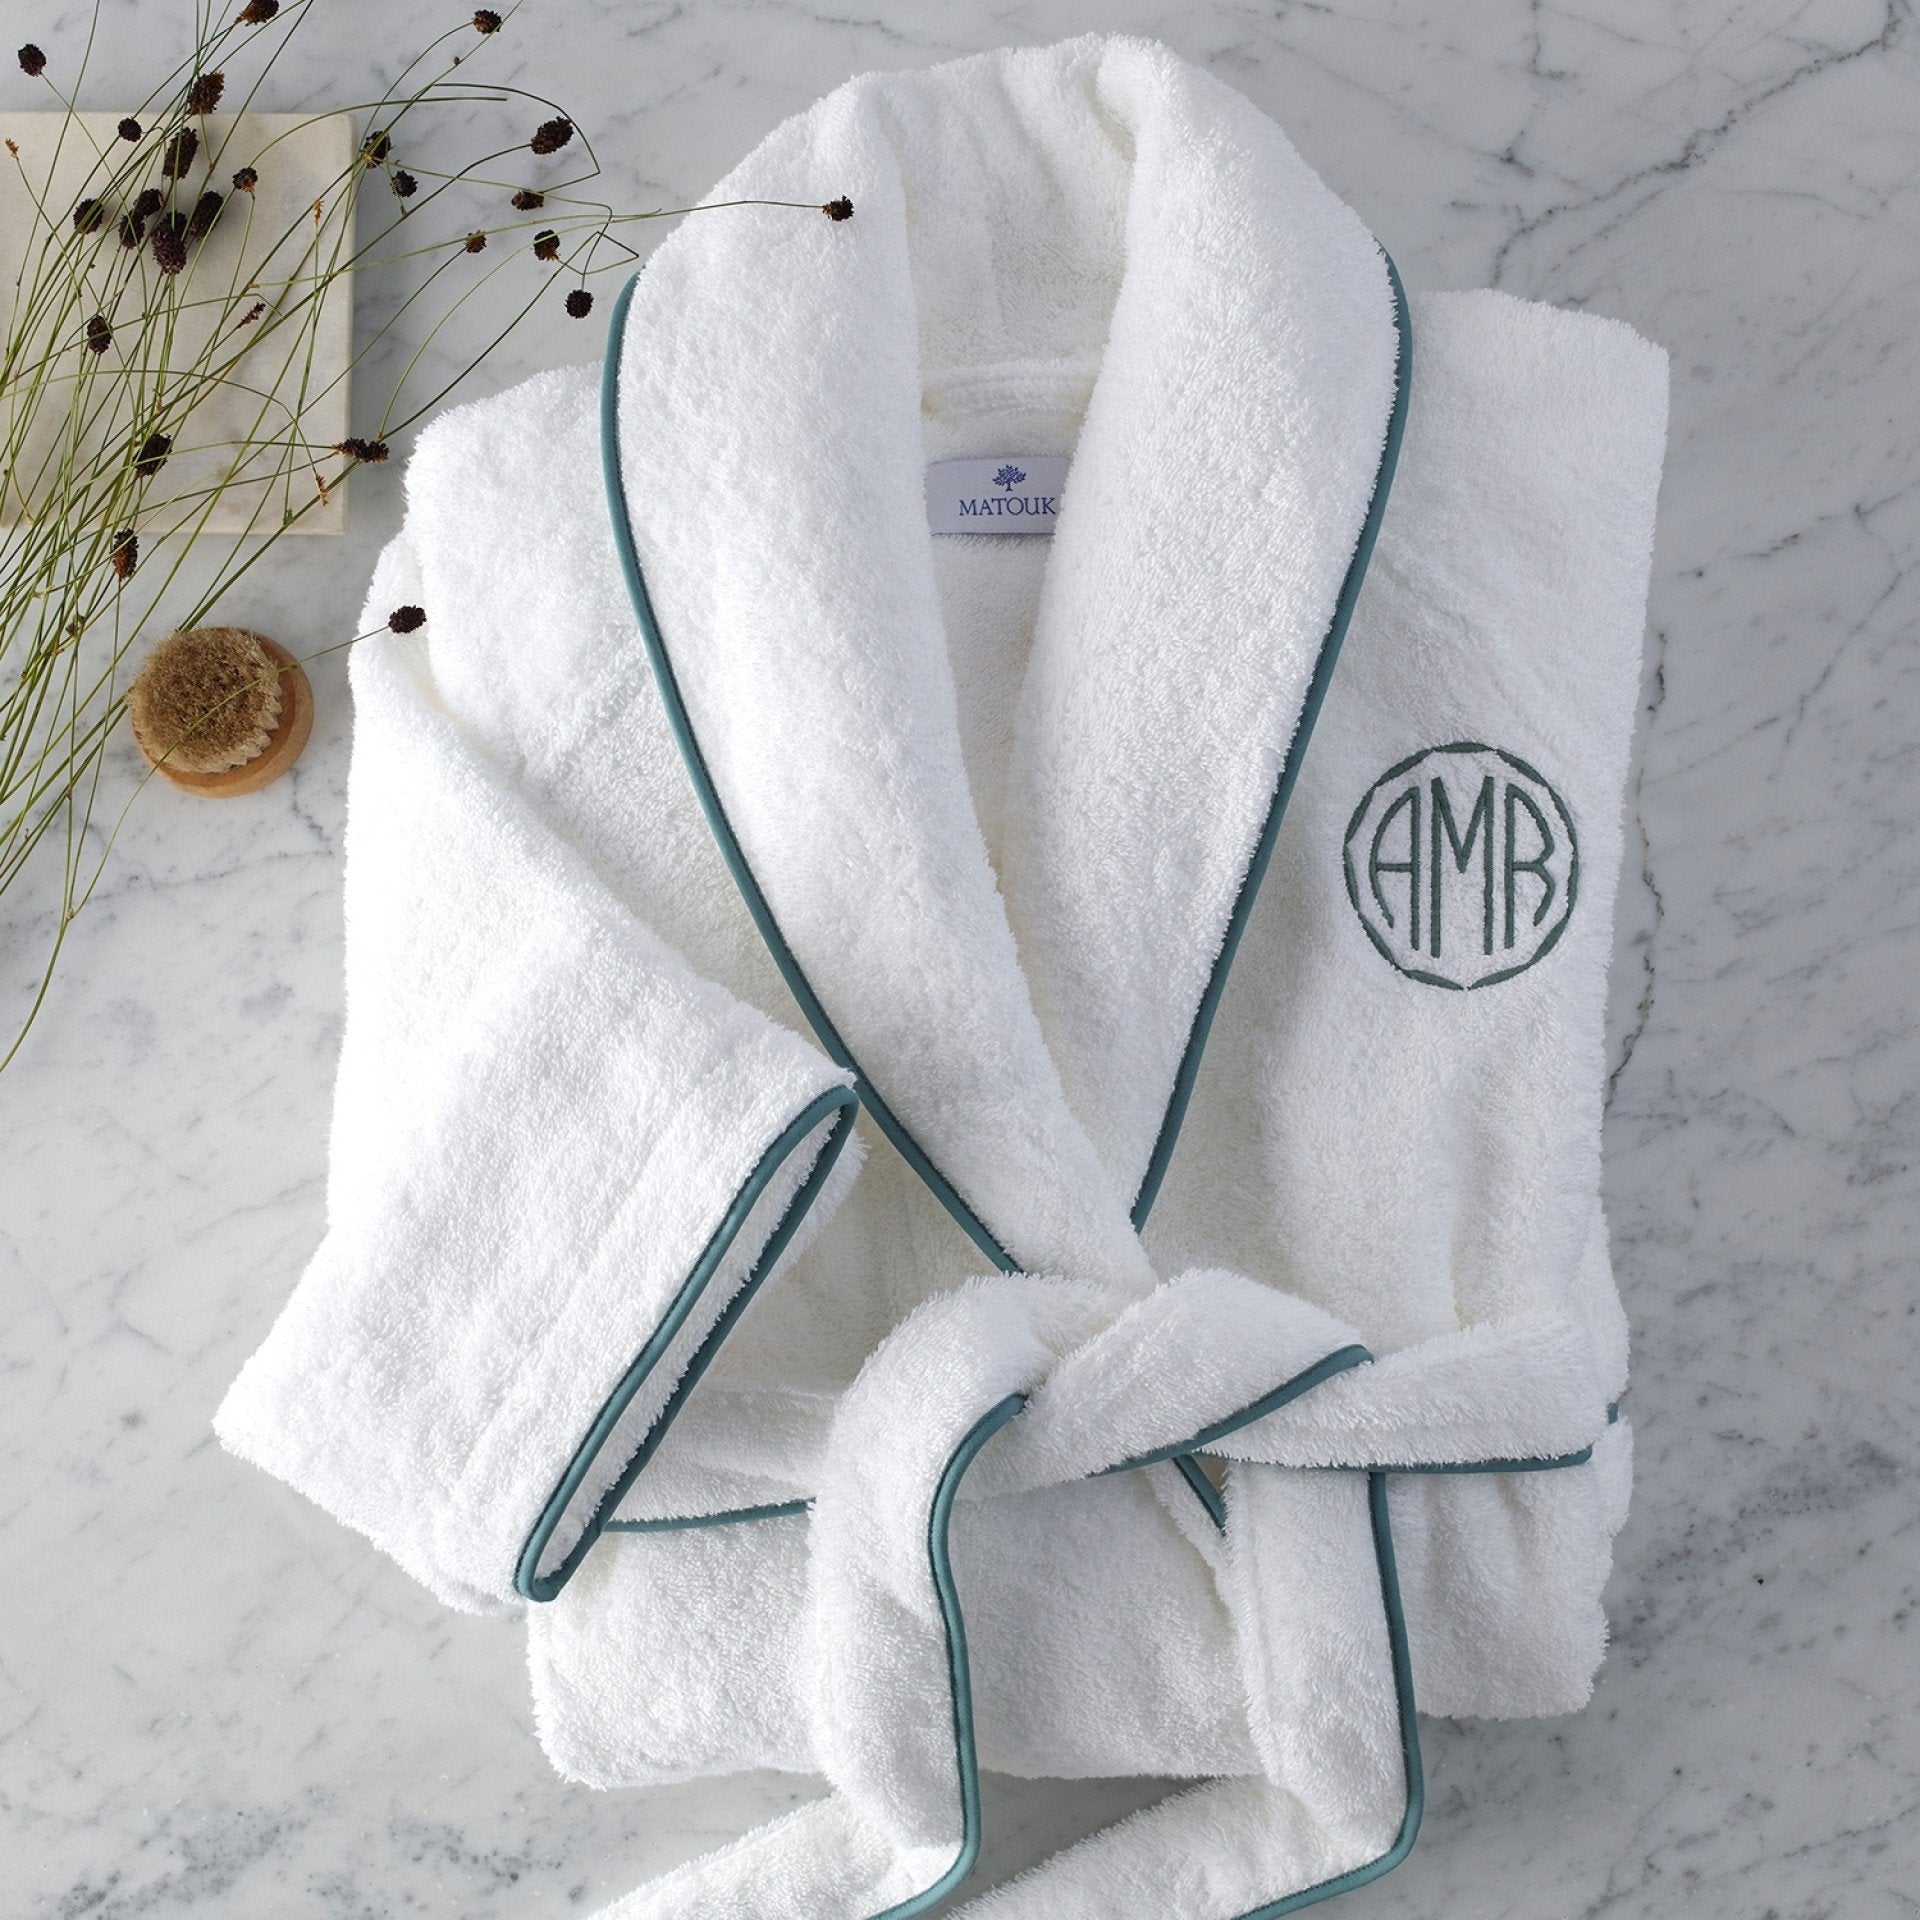 Fig Linens - Matouk Robes - White Cairo Robe with Sea Piping and Monogram